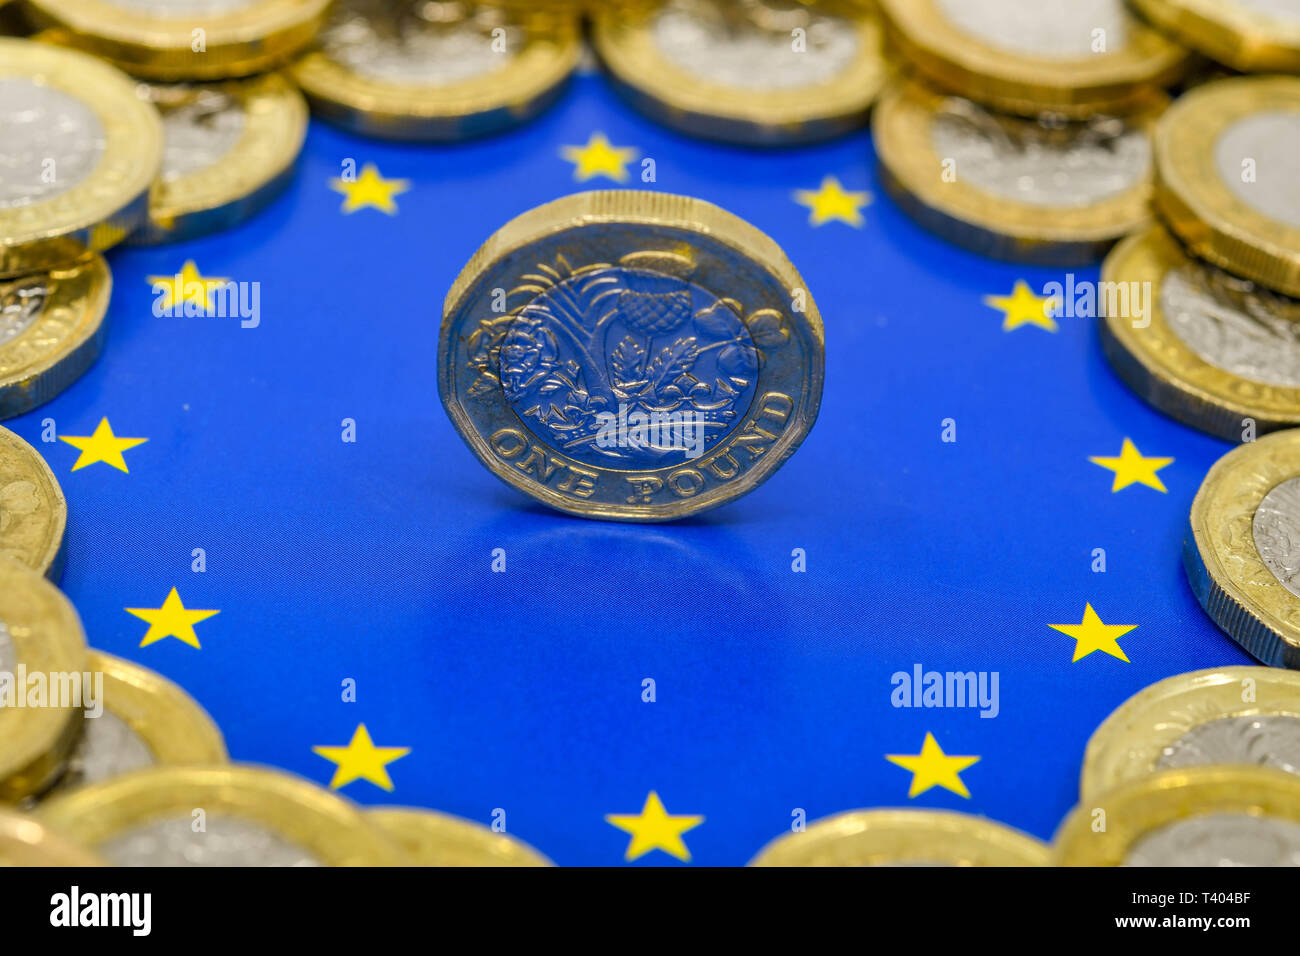 LONDON, UK - APRIL 2019: Close up view of British currency GBP - One Pound coin balance on its edge in the centre of the logo of the European Union. Stock Photo